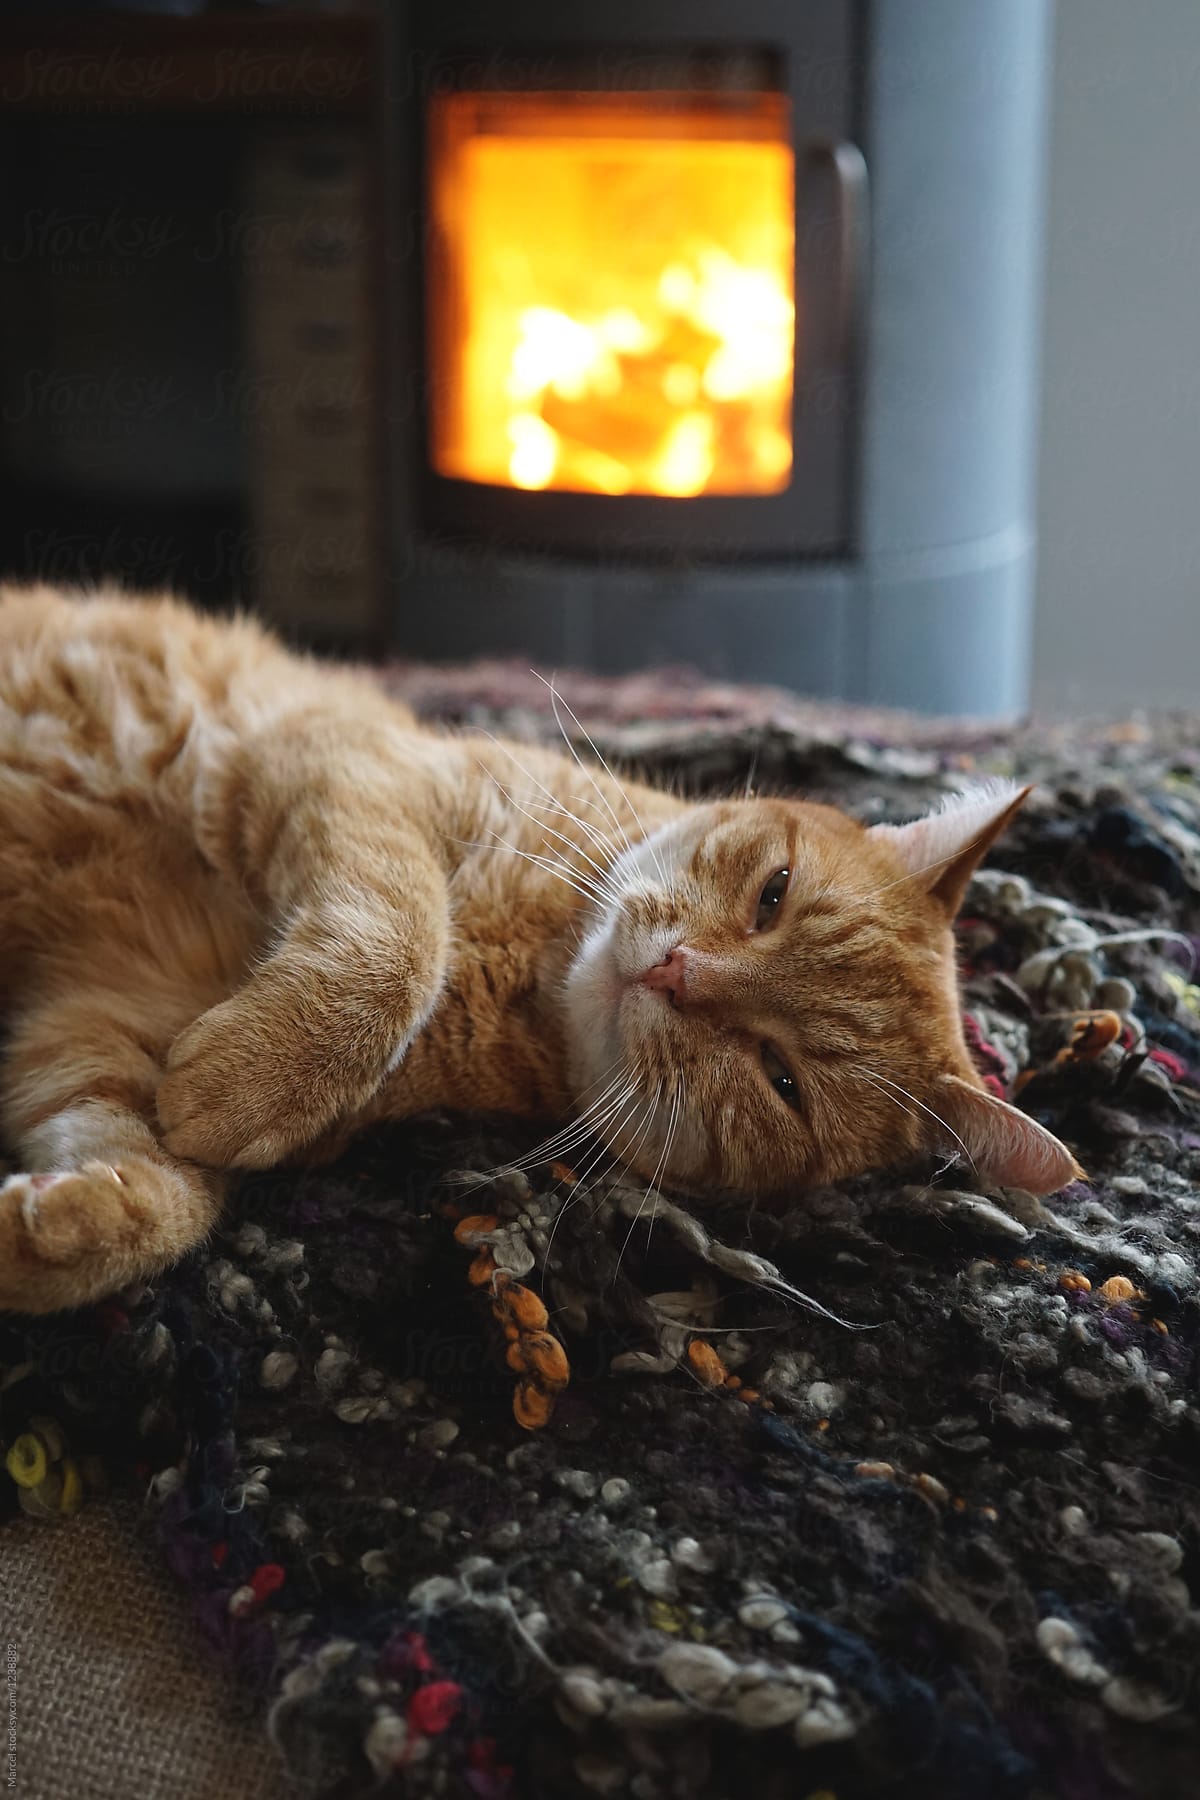 Cat on blanket in front of fireplace